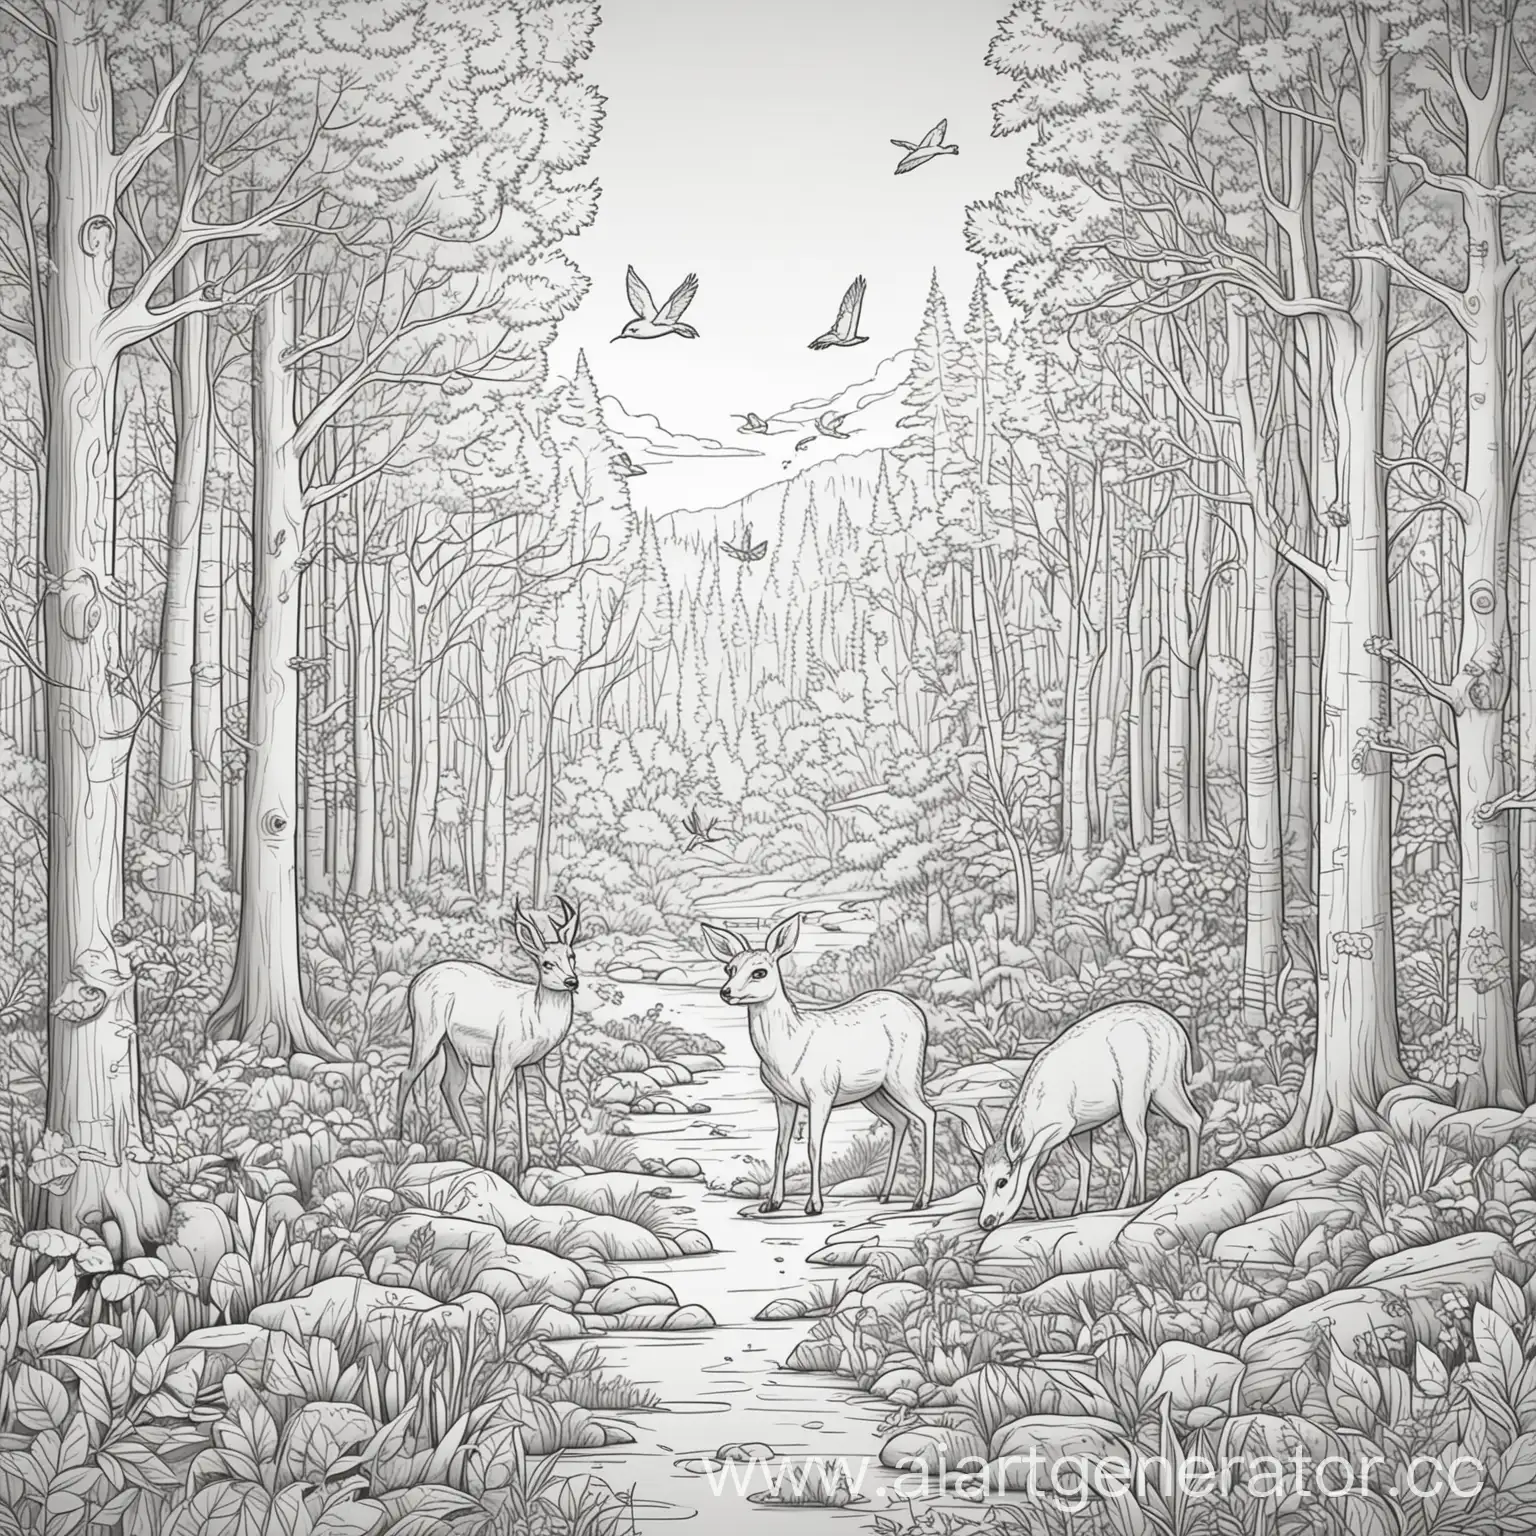 Adorable-Forest-Animals-Coloring-Page-for-Kids-Deer-Rabbits-Birds